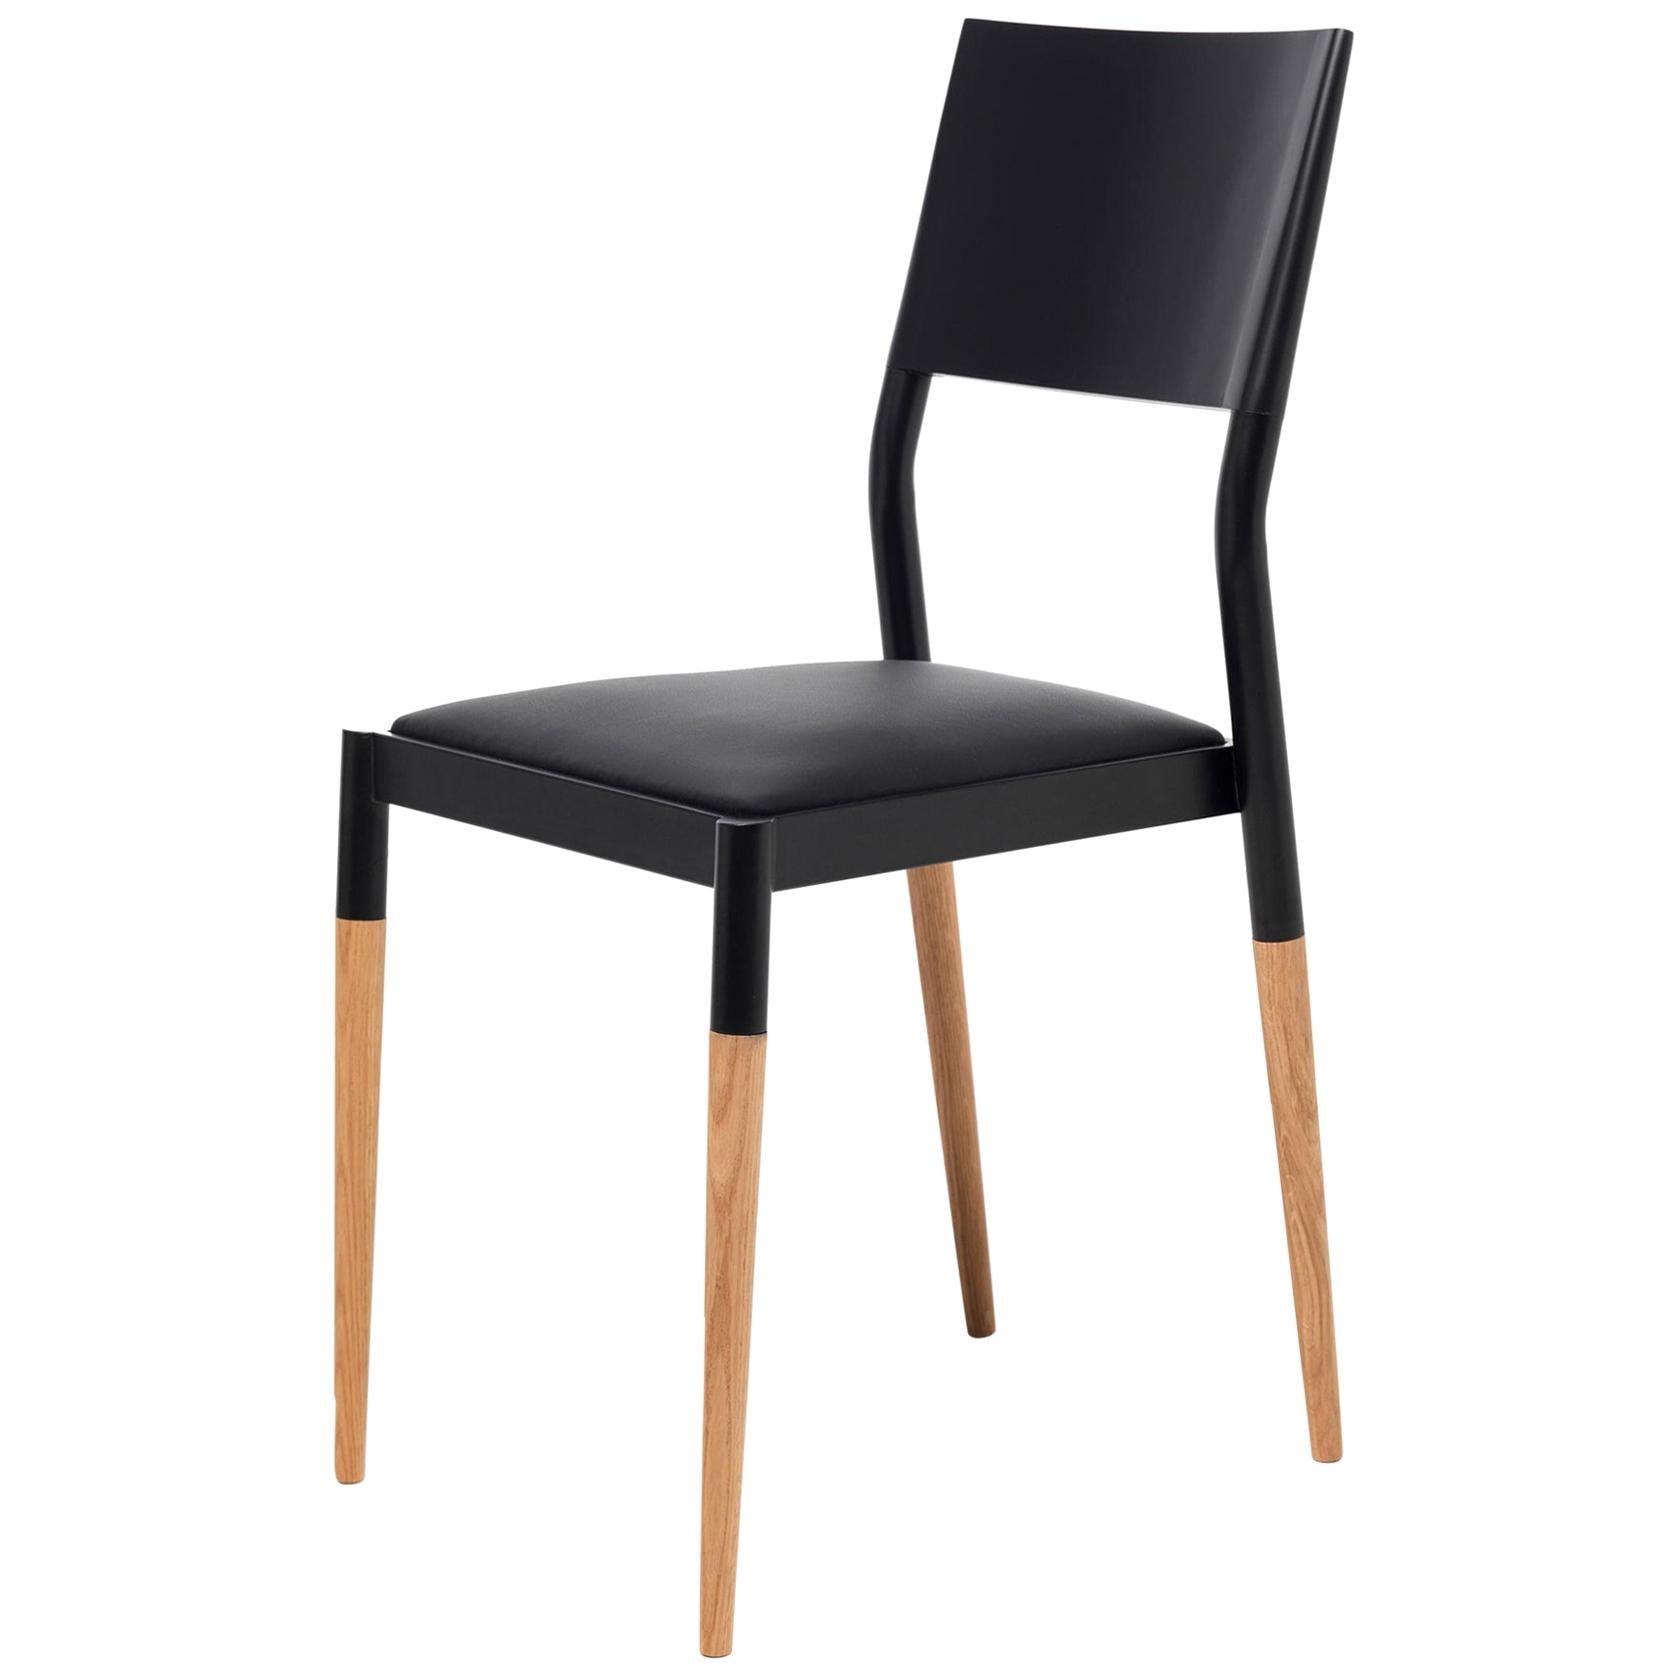 21st Century Modern Steel And Wood Chair With Leather Upholstered Seat For Sale